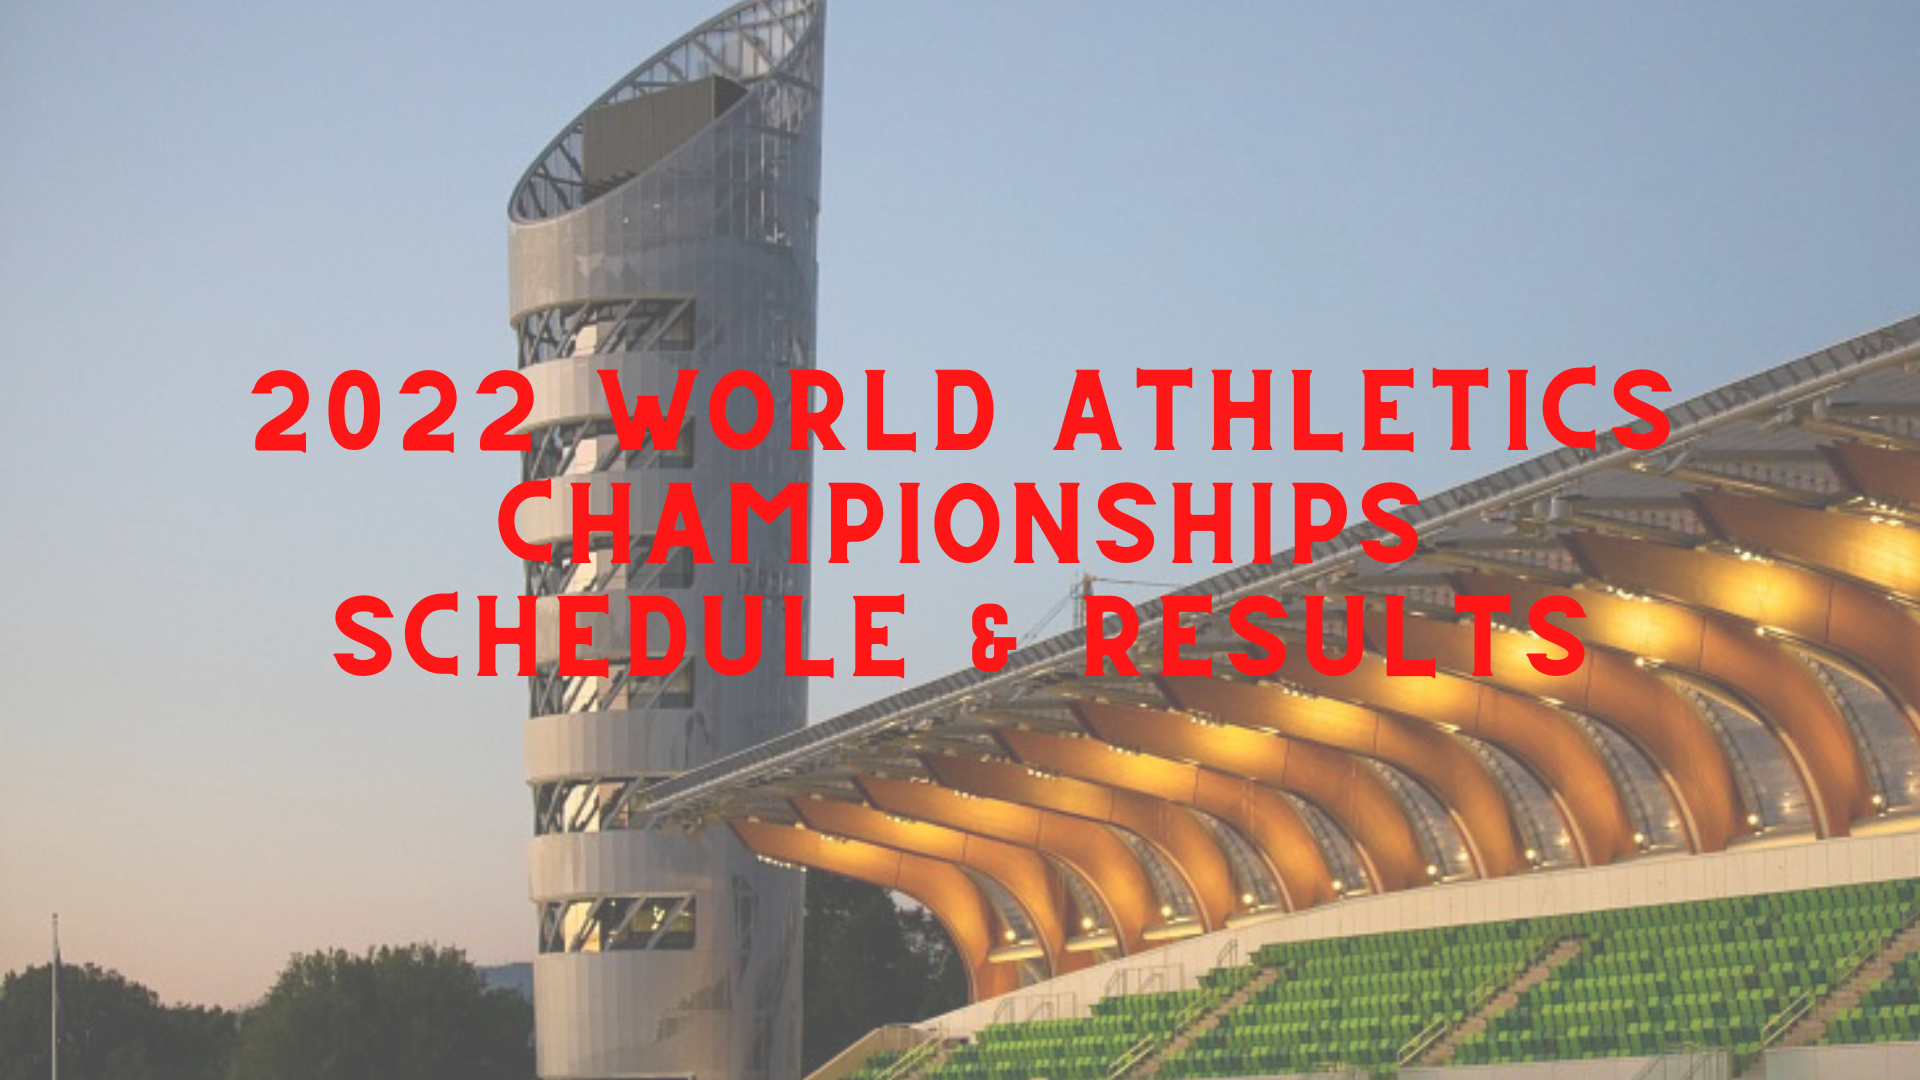 Schedule and Results For World Athletics Championships Oregon22 - 2022